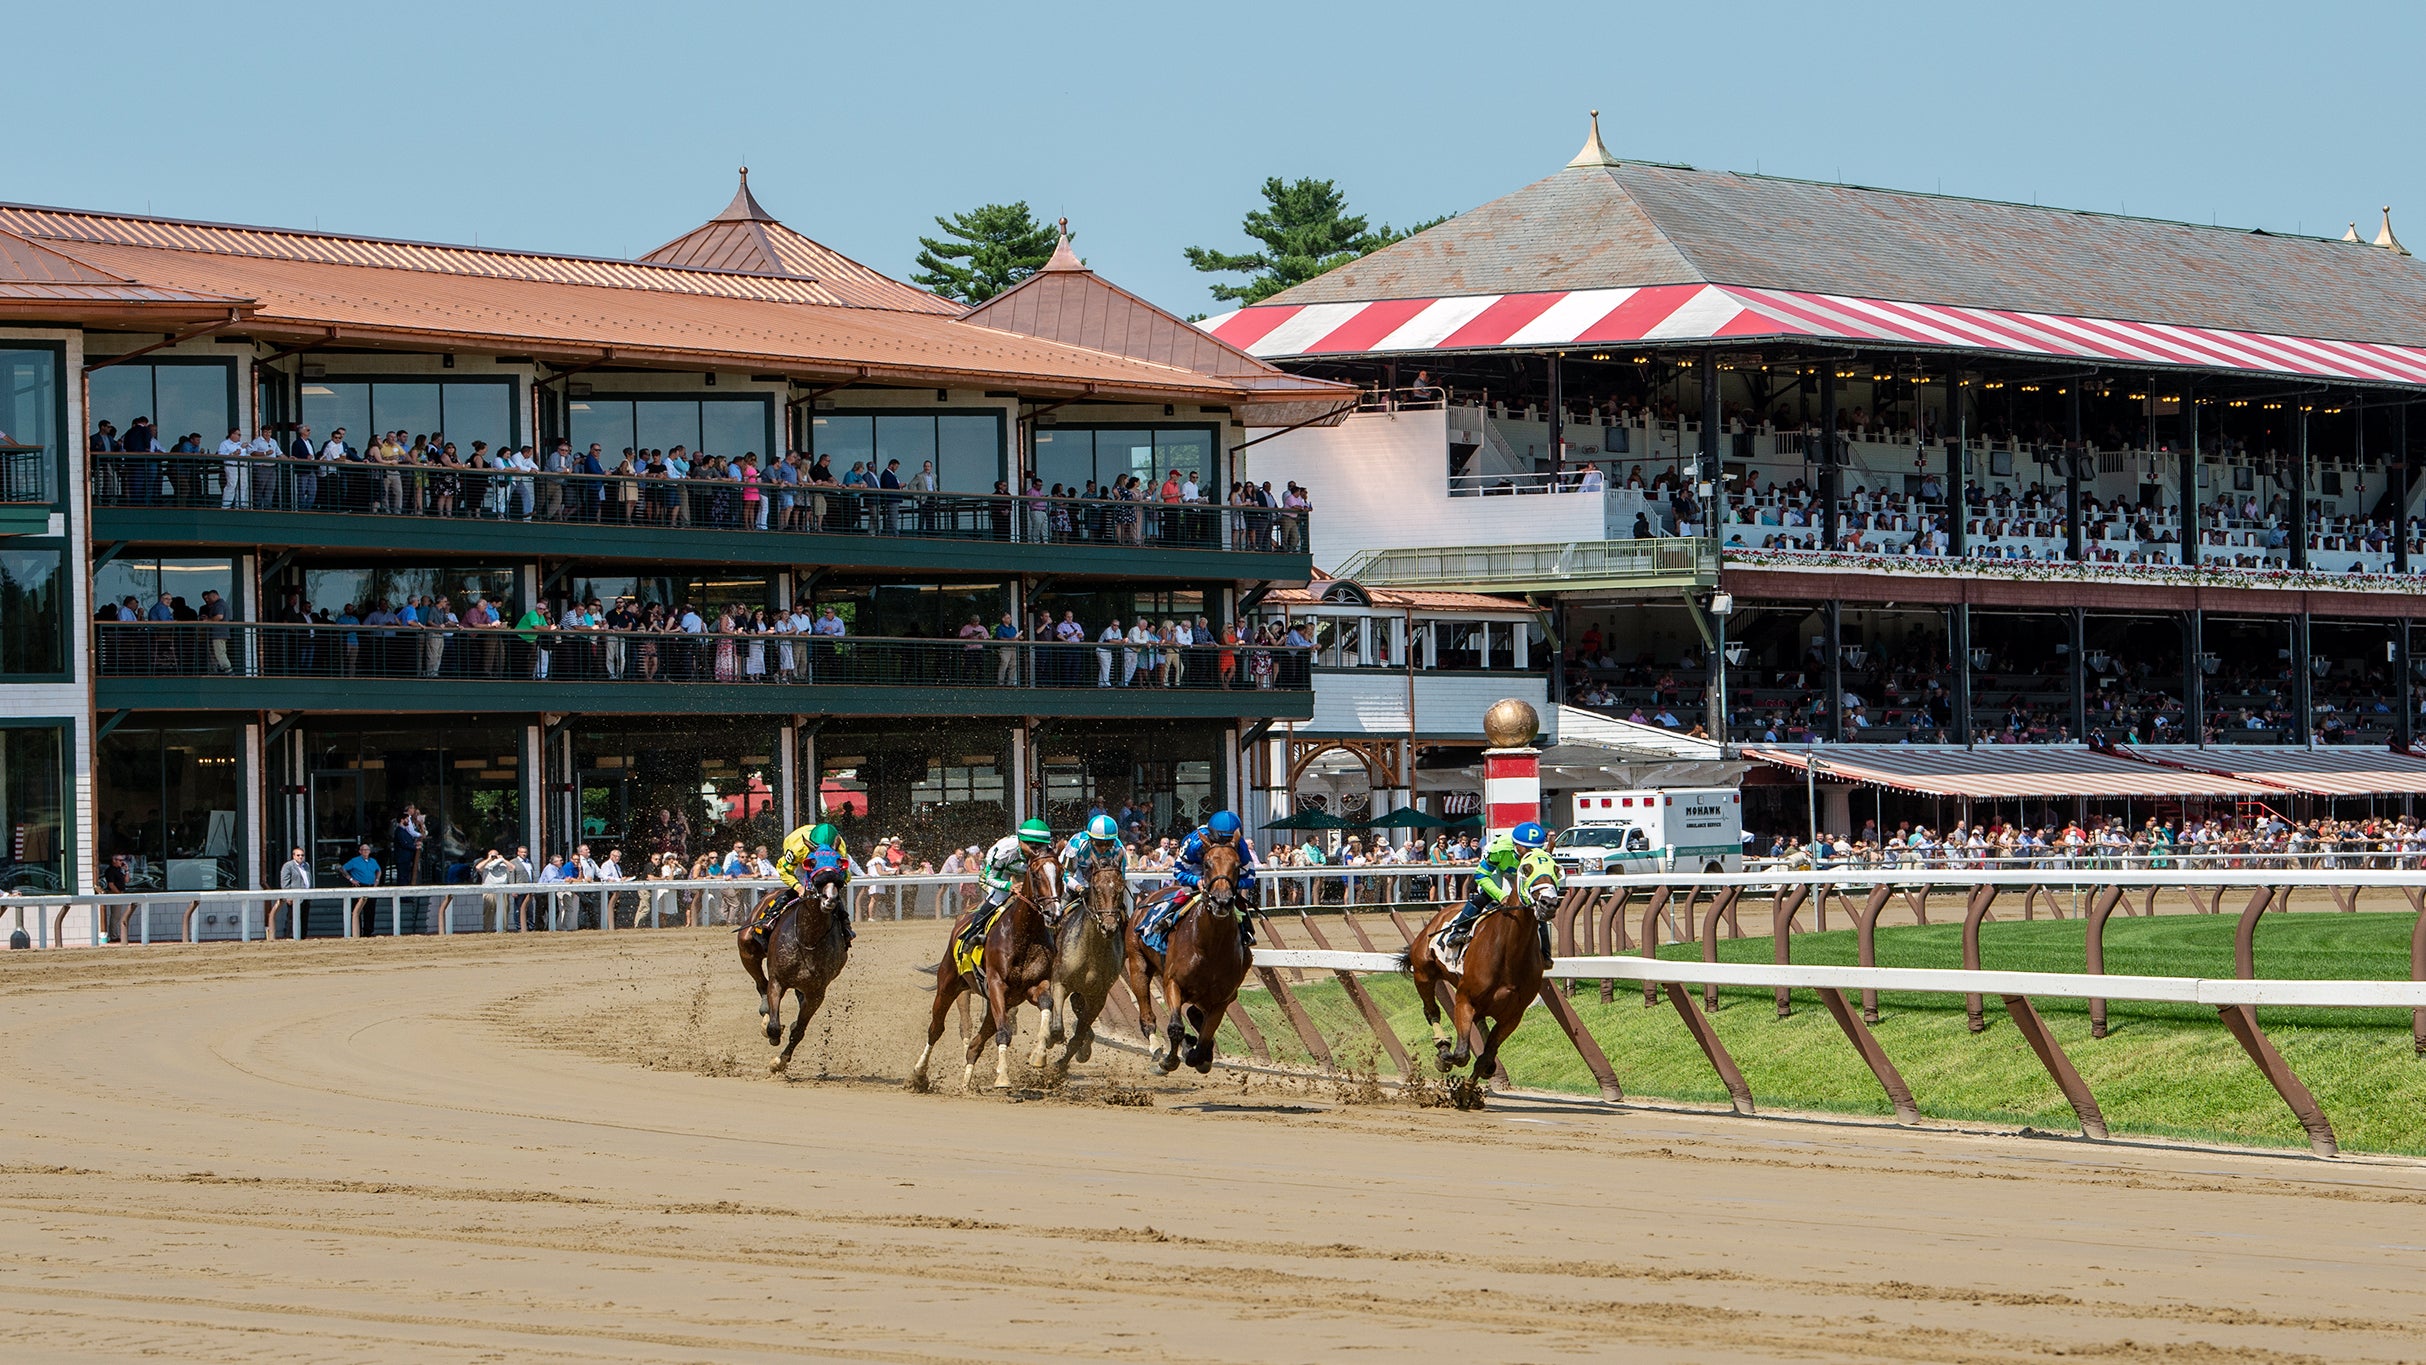 Saratoga Race Course Club Terrace Dining in Saratoga Springs promo photo for Exclusive presale offer code